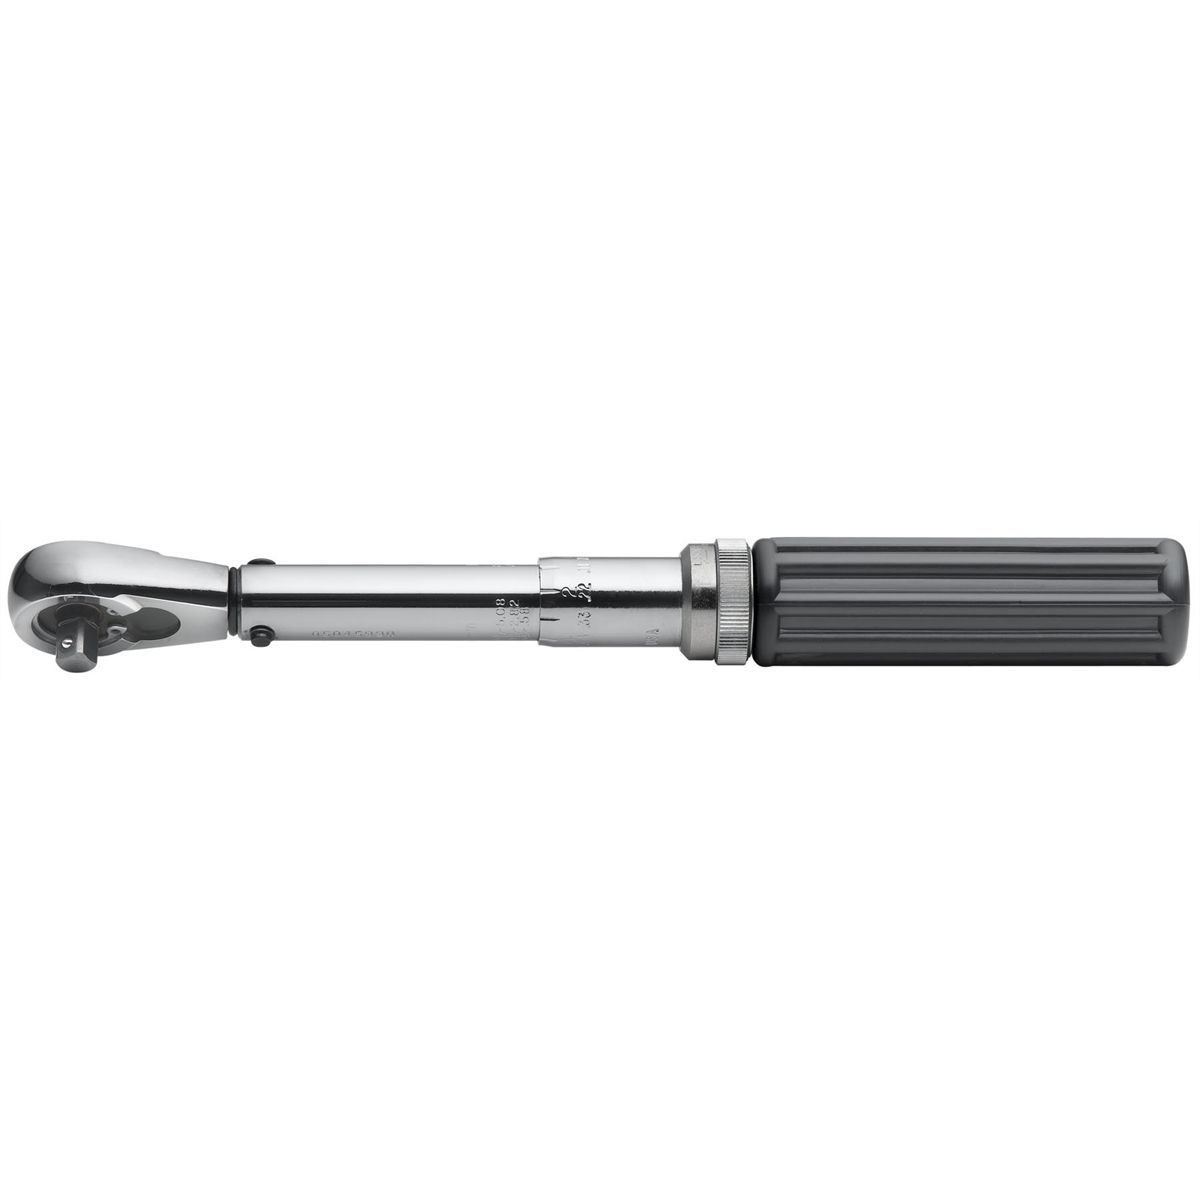 GearWrench 1/4 In Micrometer Torque Wrench - 30-200 in-lbs